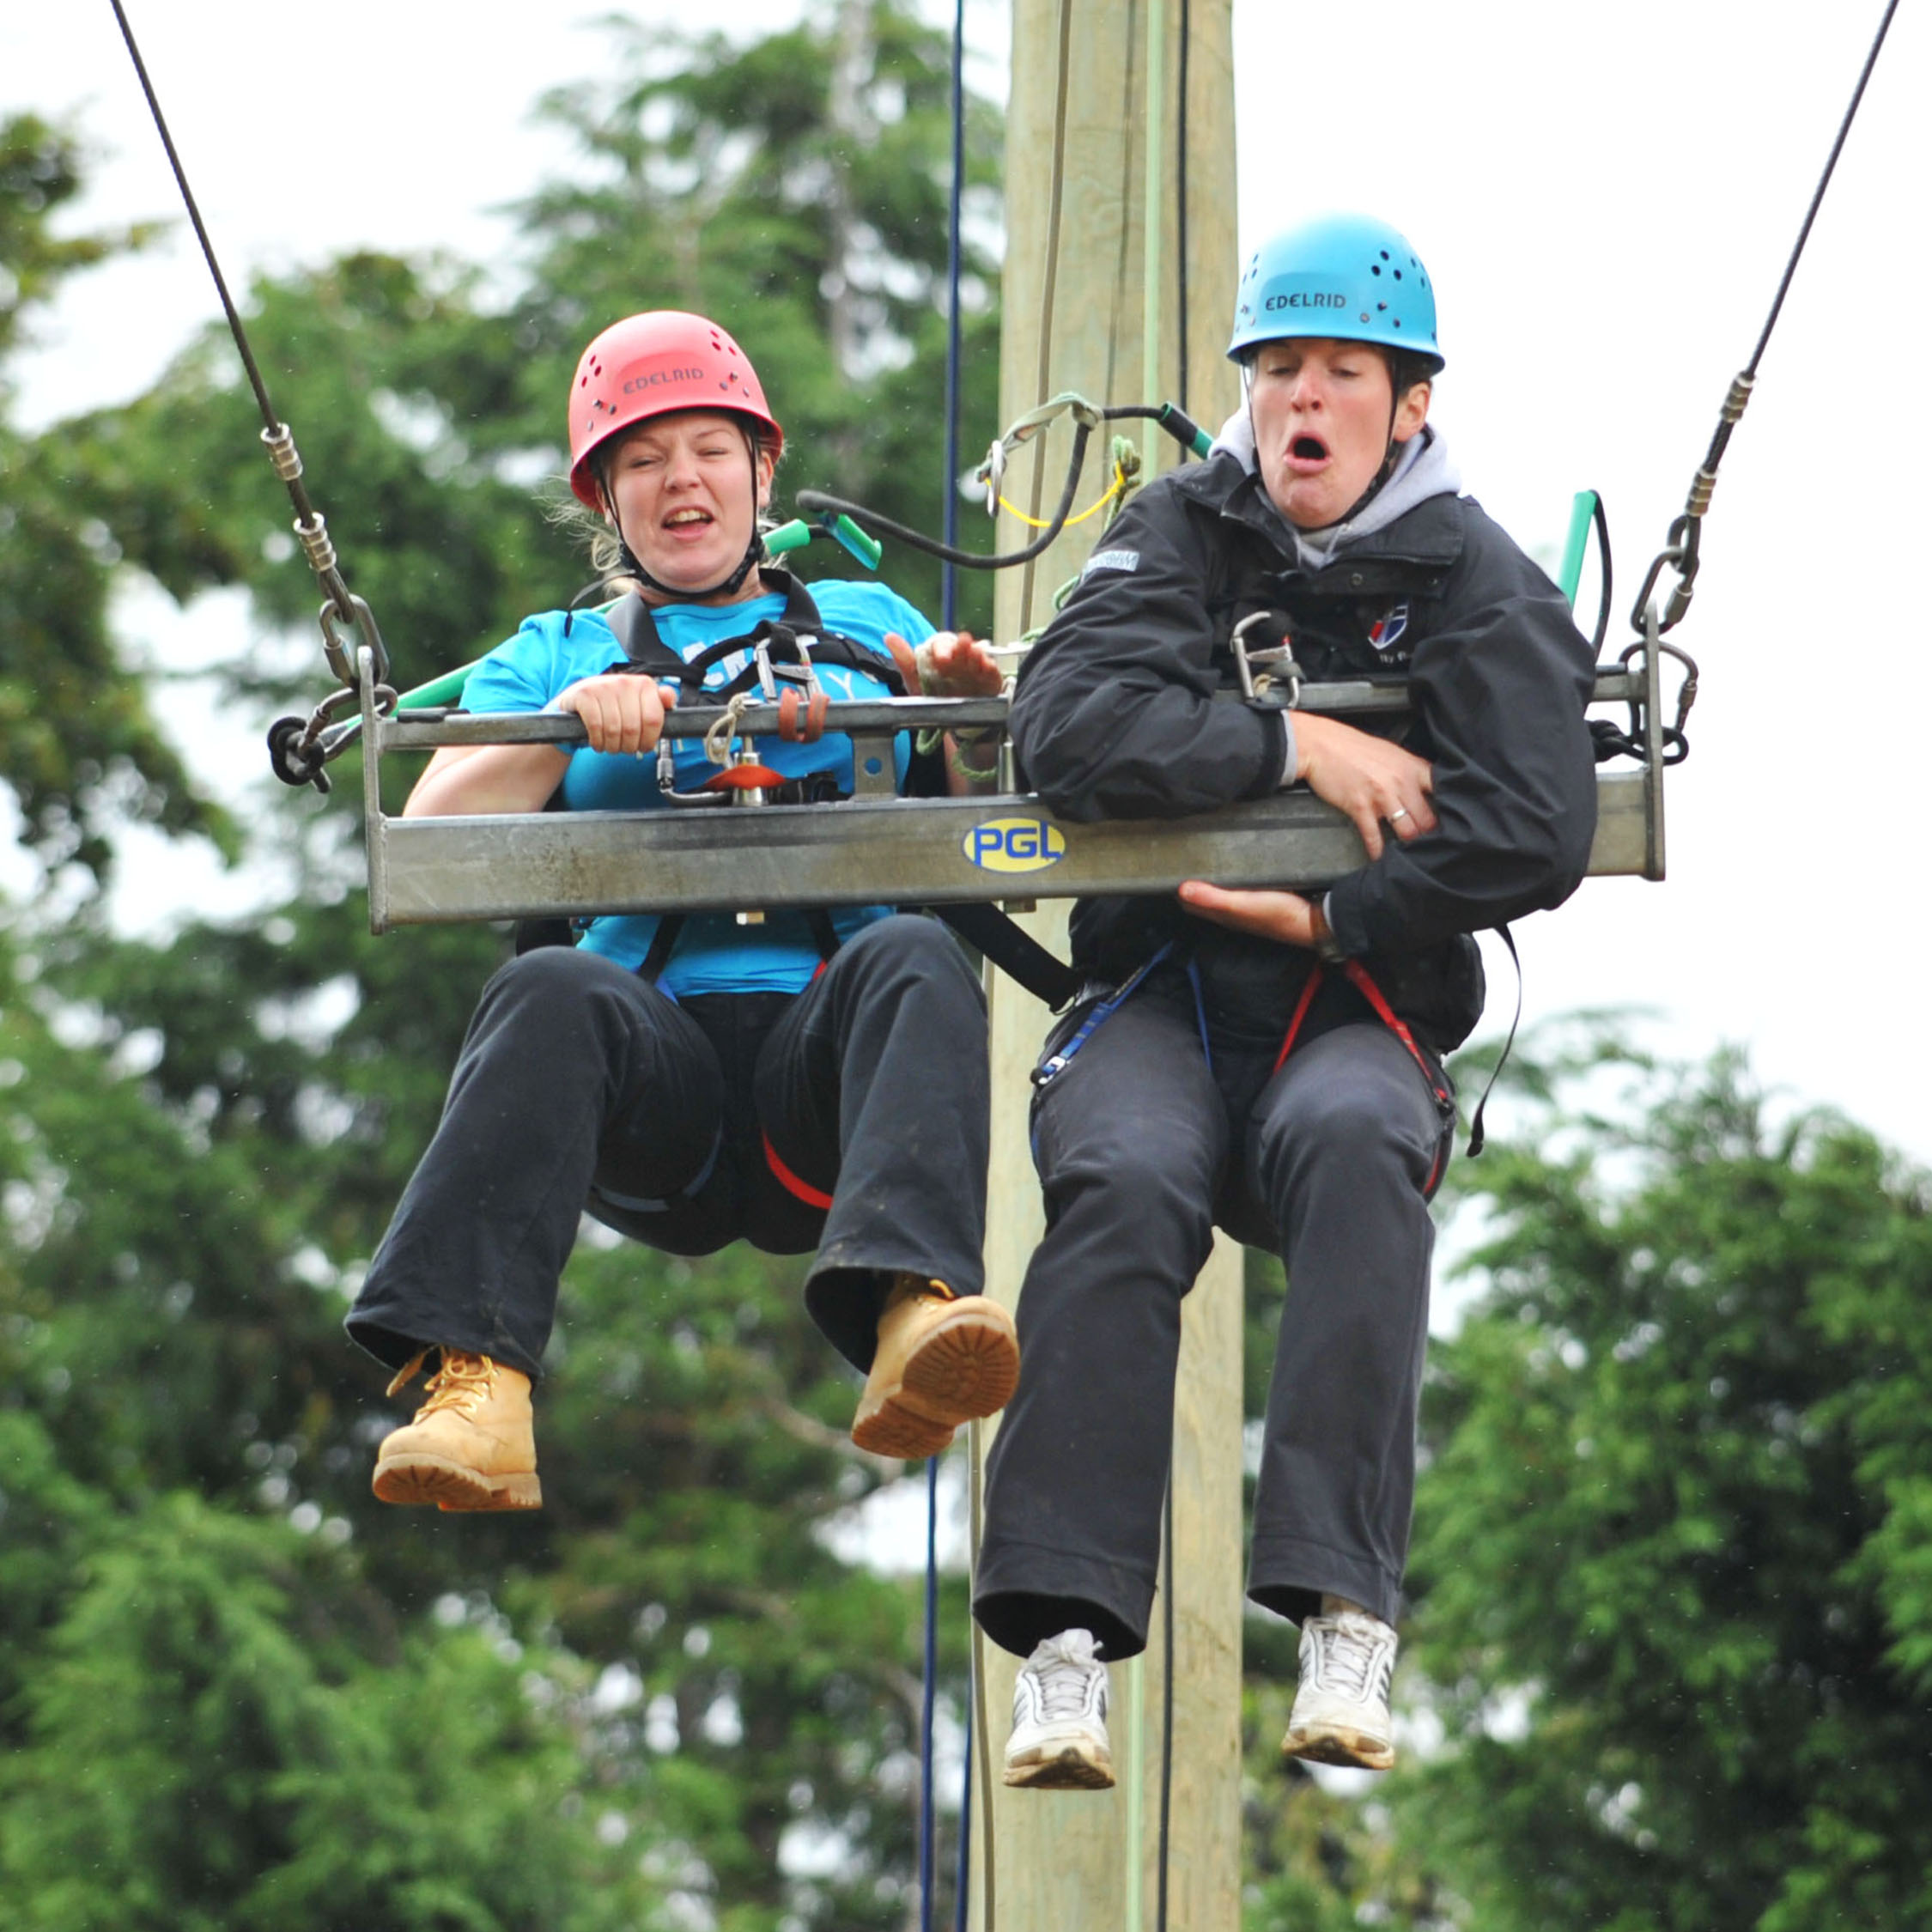 Teachers on the Giant Swing at PGL